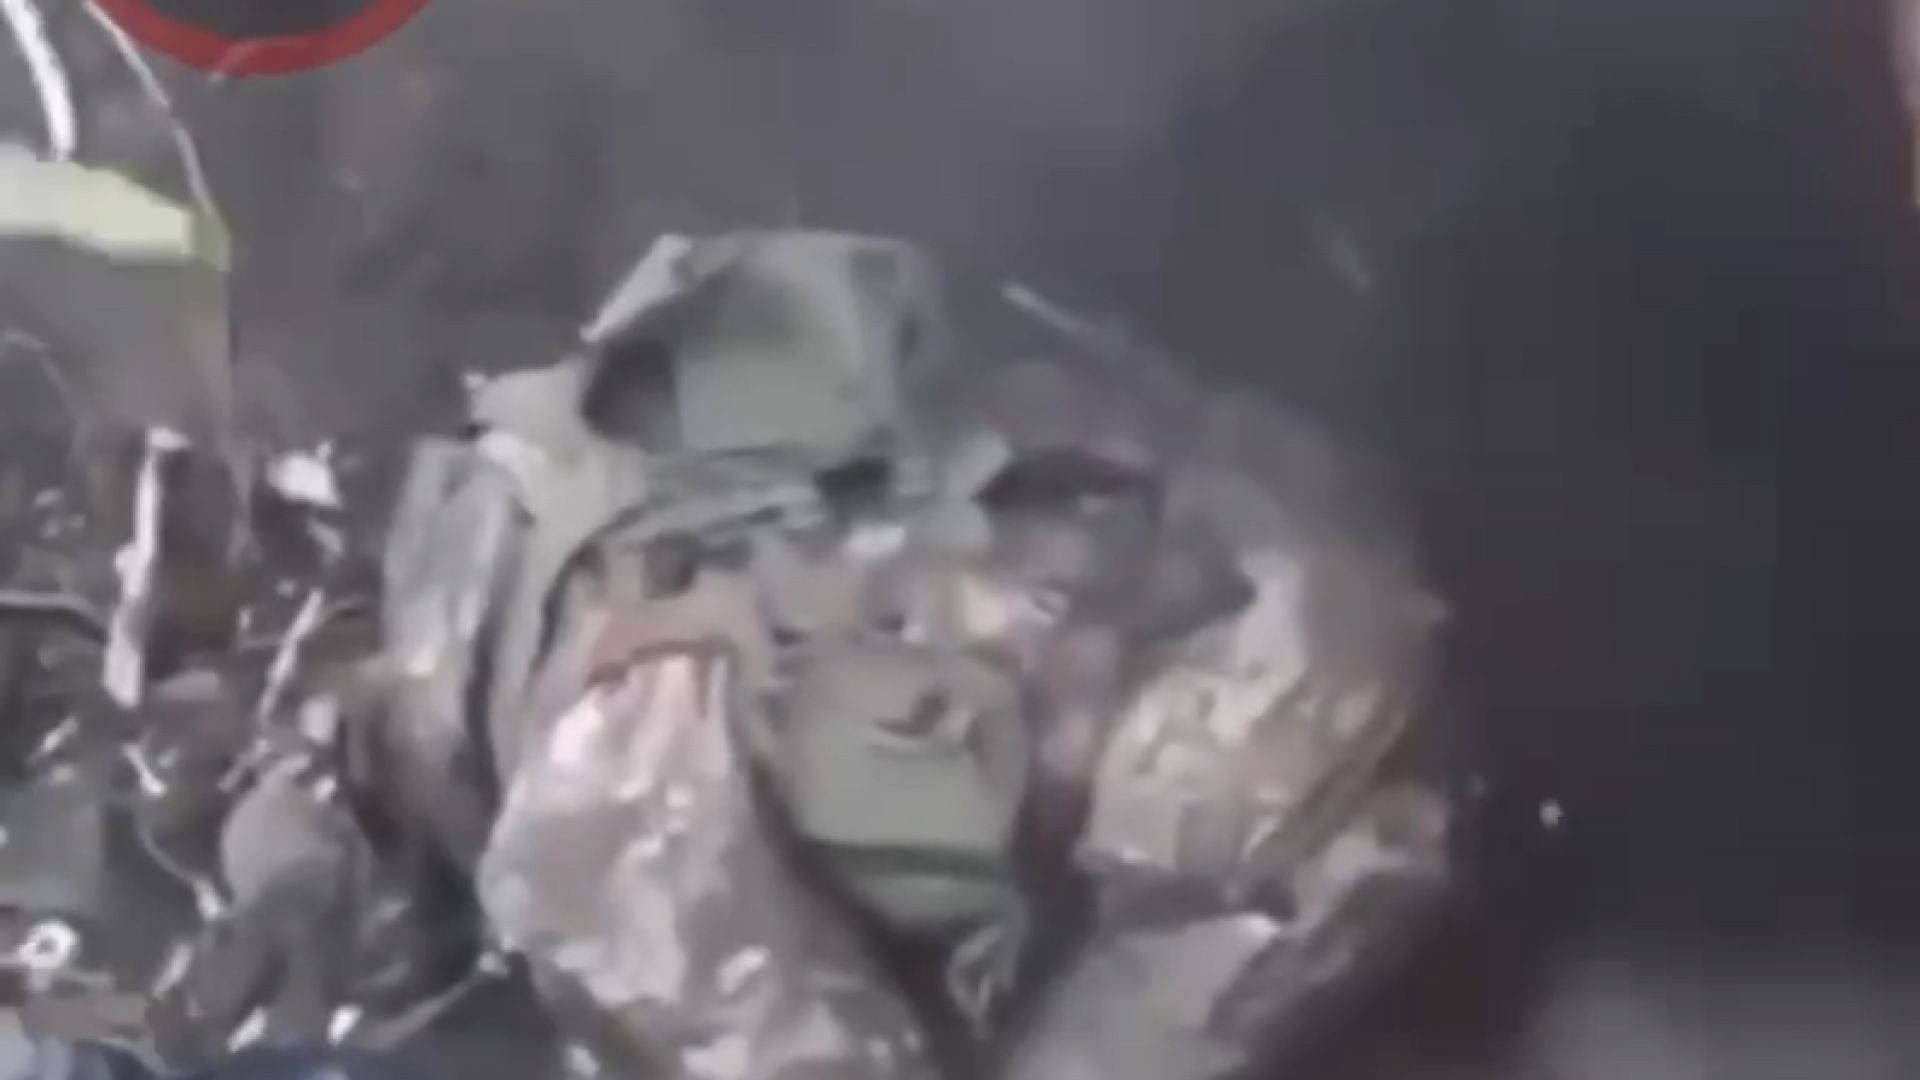 (WARNING: GRAPHIC CONTENT.)EXCLUSIVE: SOME OF RUSSIAN BODIES SOLDIERS GET SHOTED BY RIFLE.